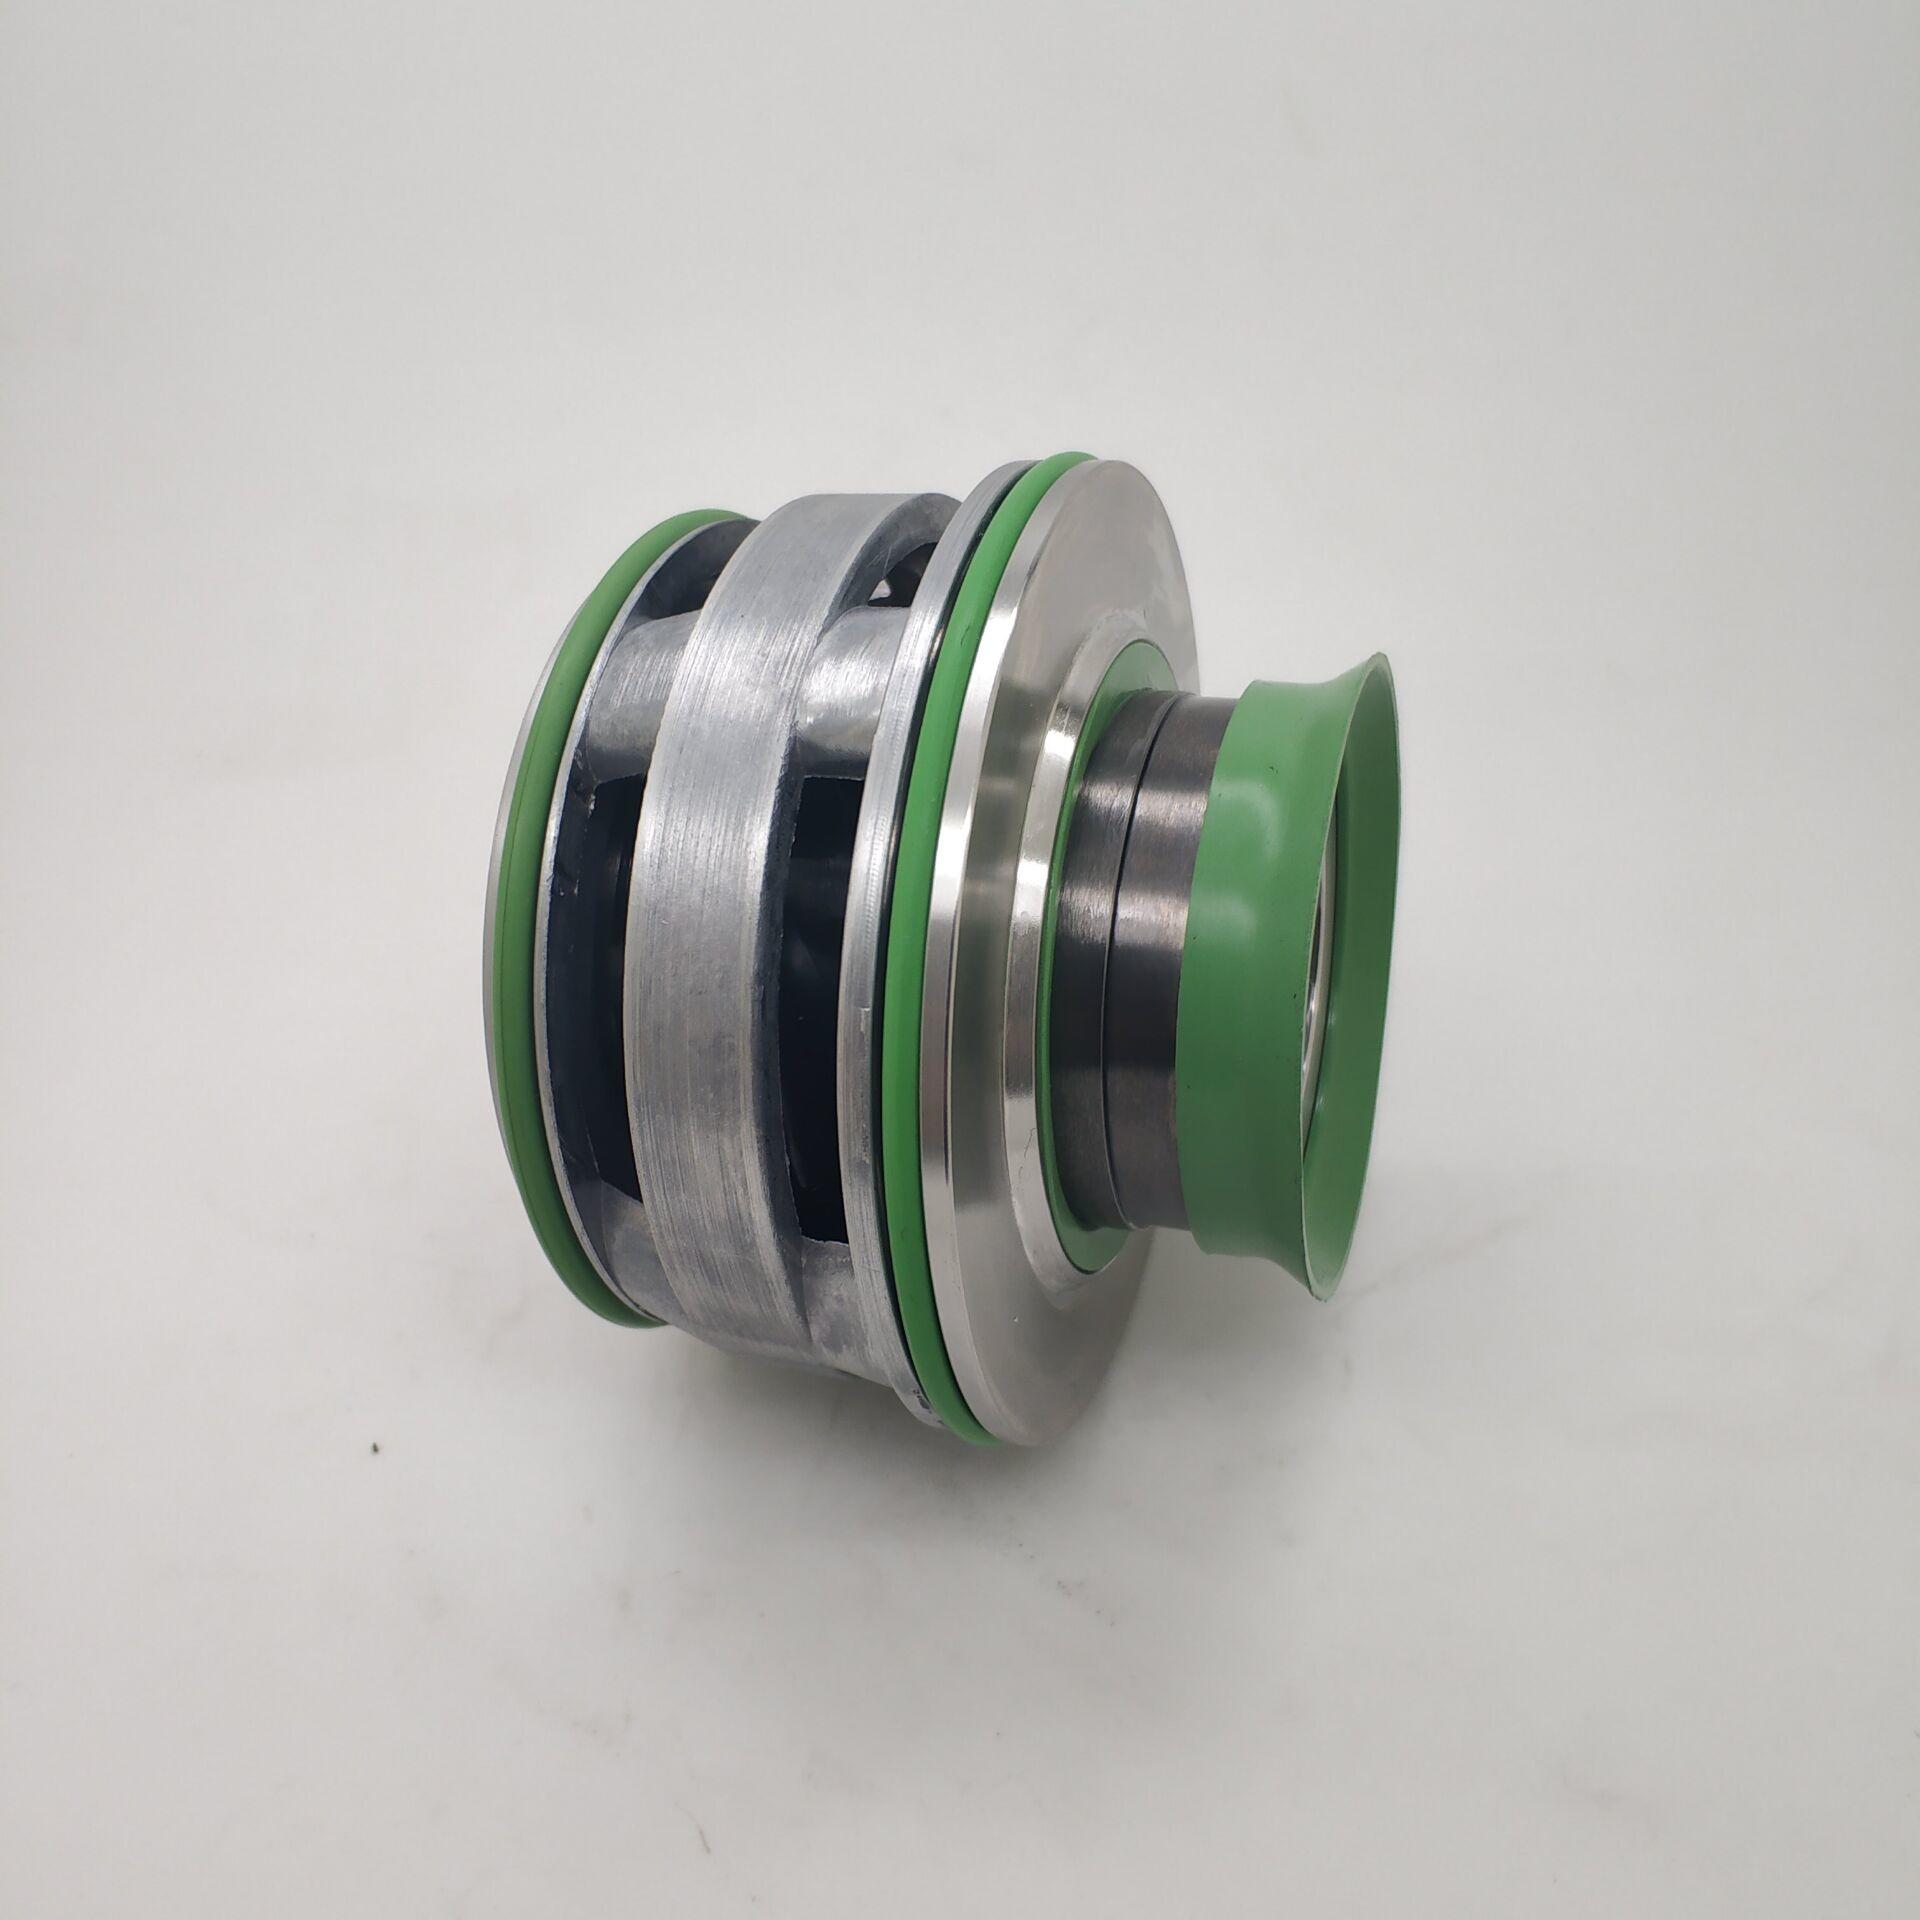 durable flygt pump mechanical seal fsf ODM for hanging